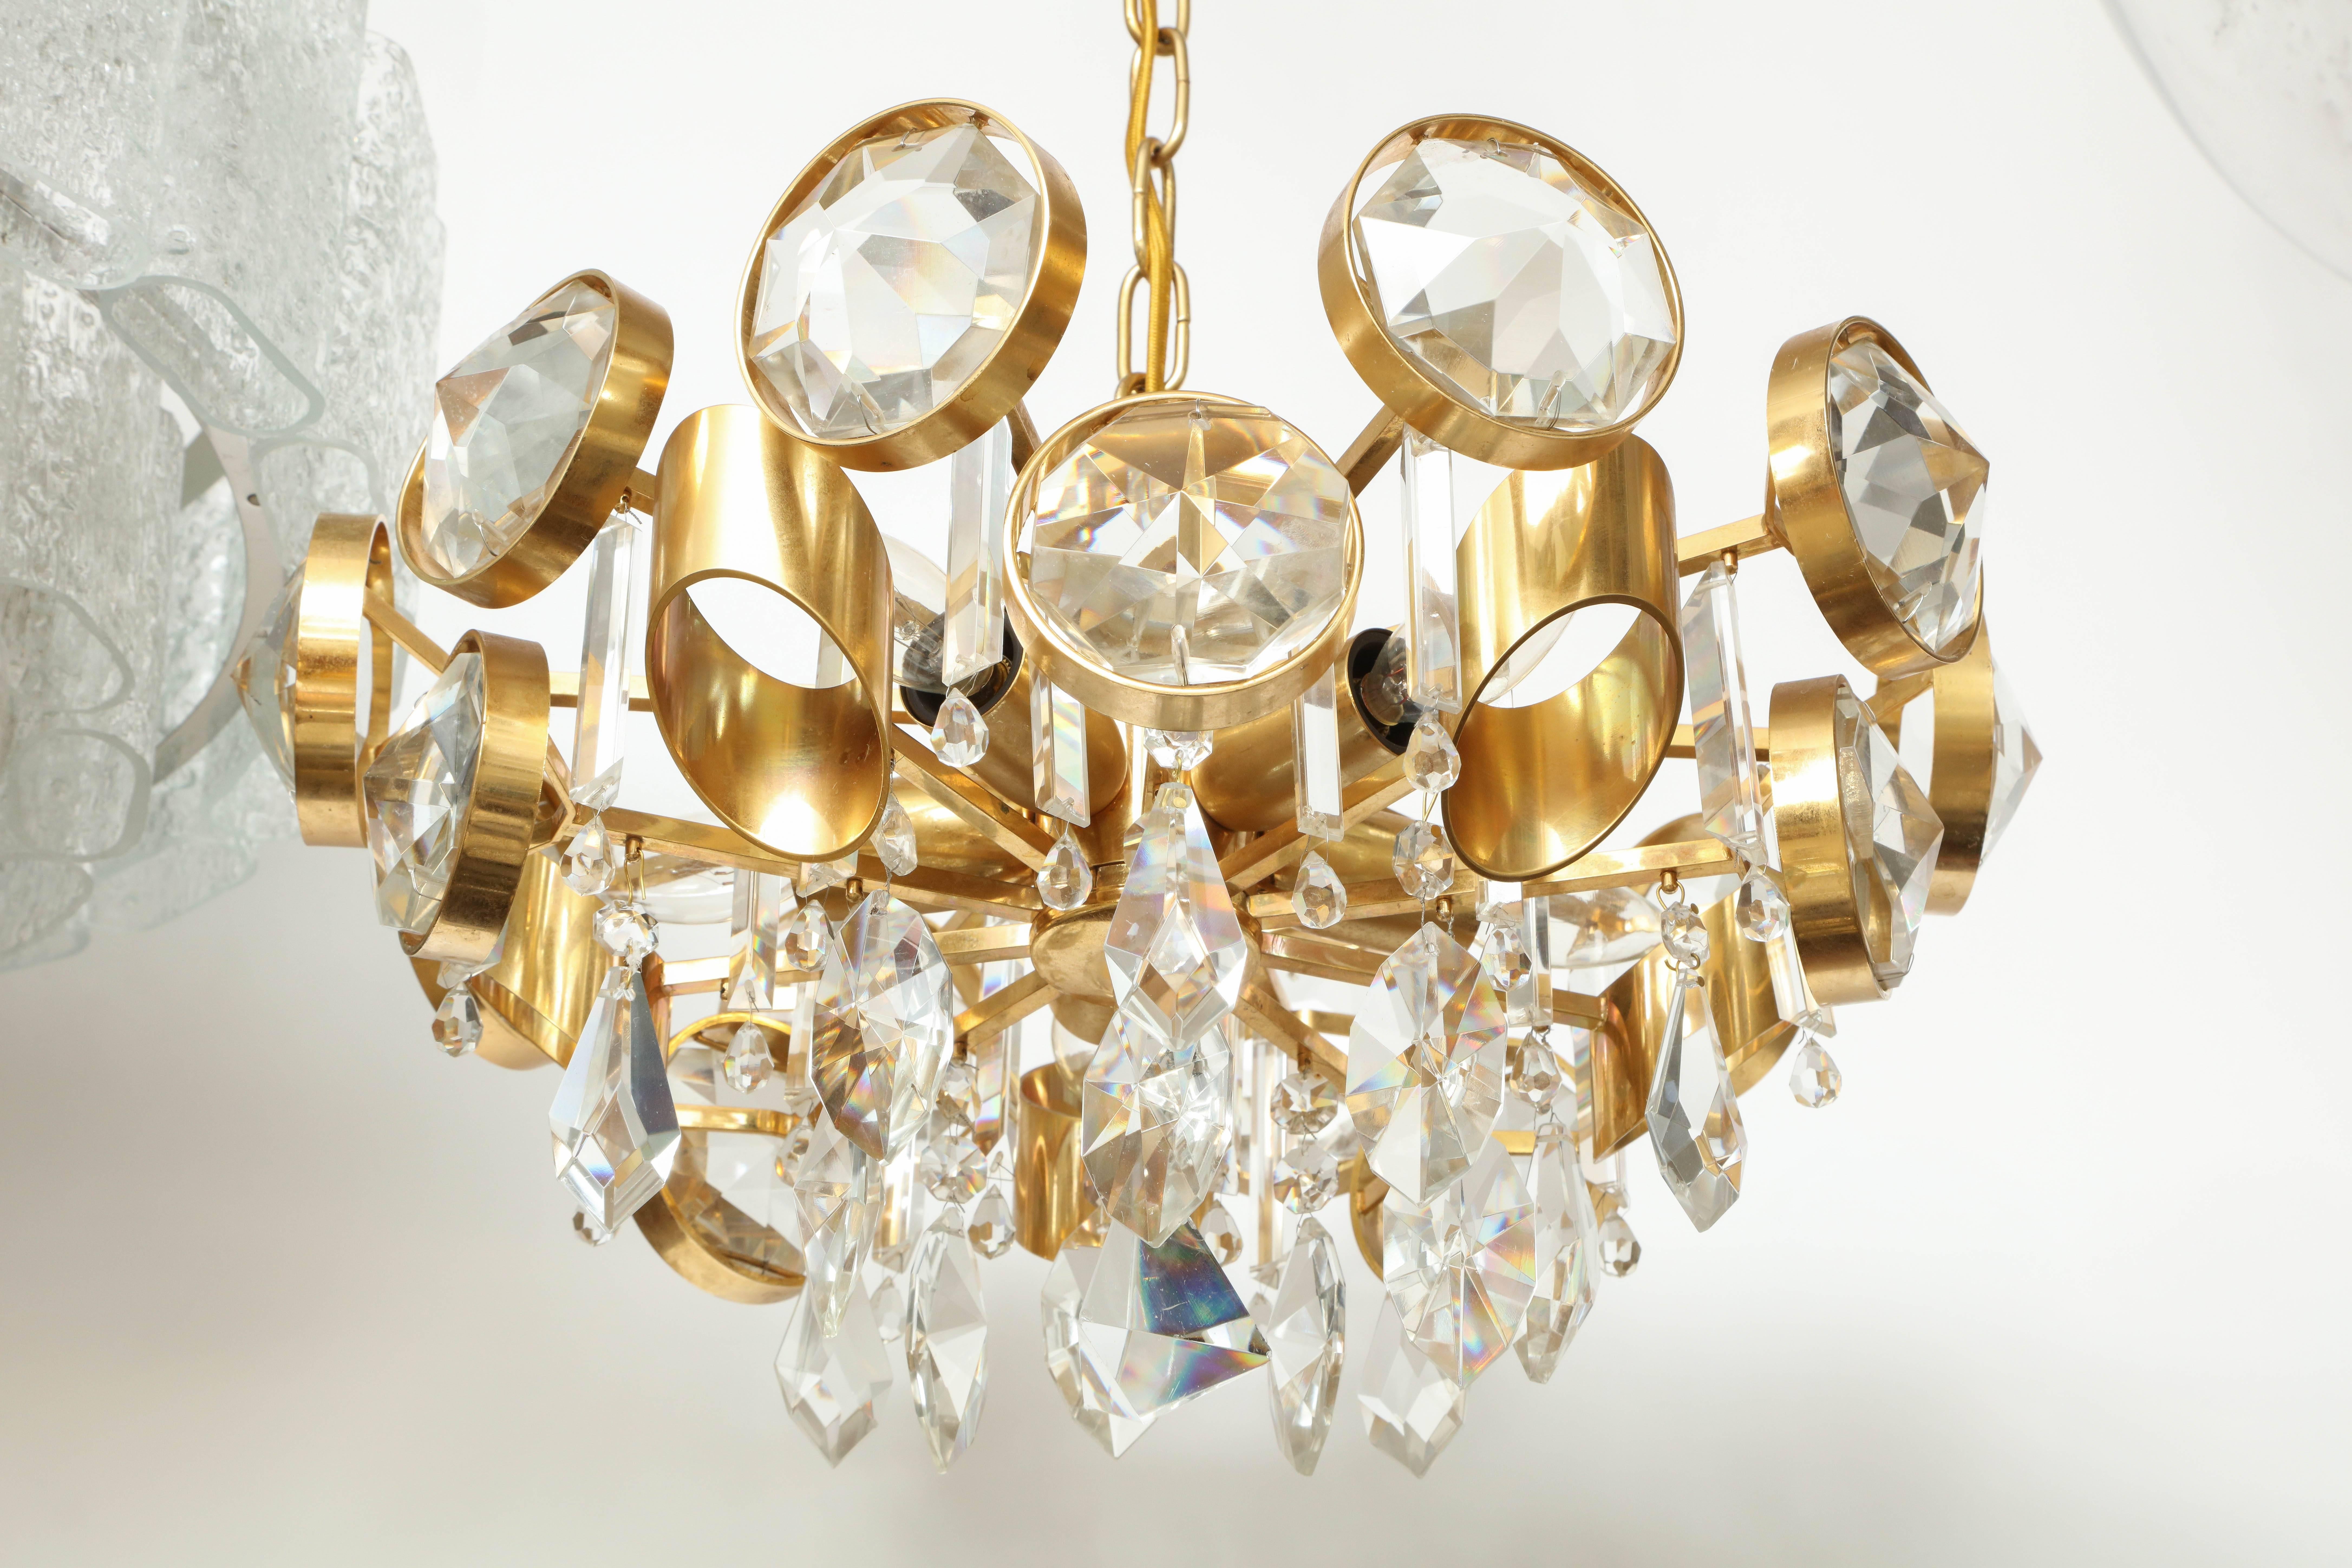 Hollywood Regency eye-catching chandelier with large round faceted Austrian crystals housed in a gilt washed frame featuring faceted cascading crystal drops in the center. Rewired for use in the USA, using five chandelier type bulbs.